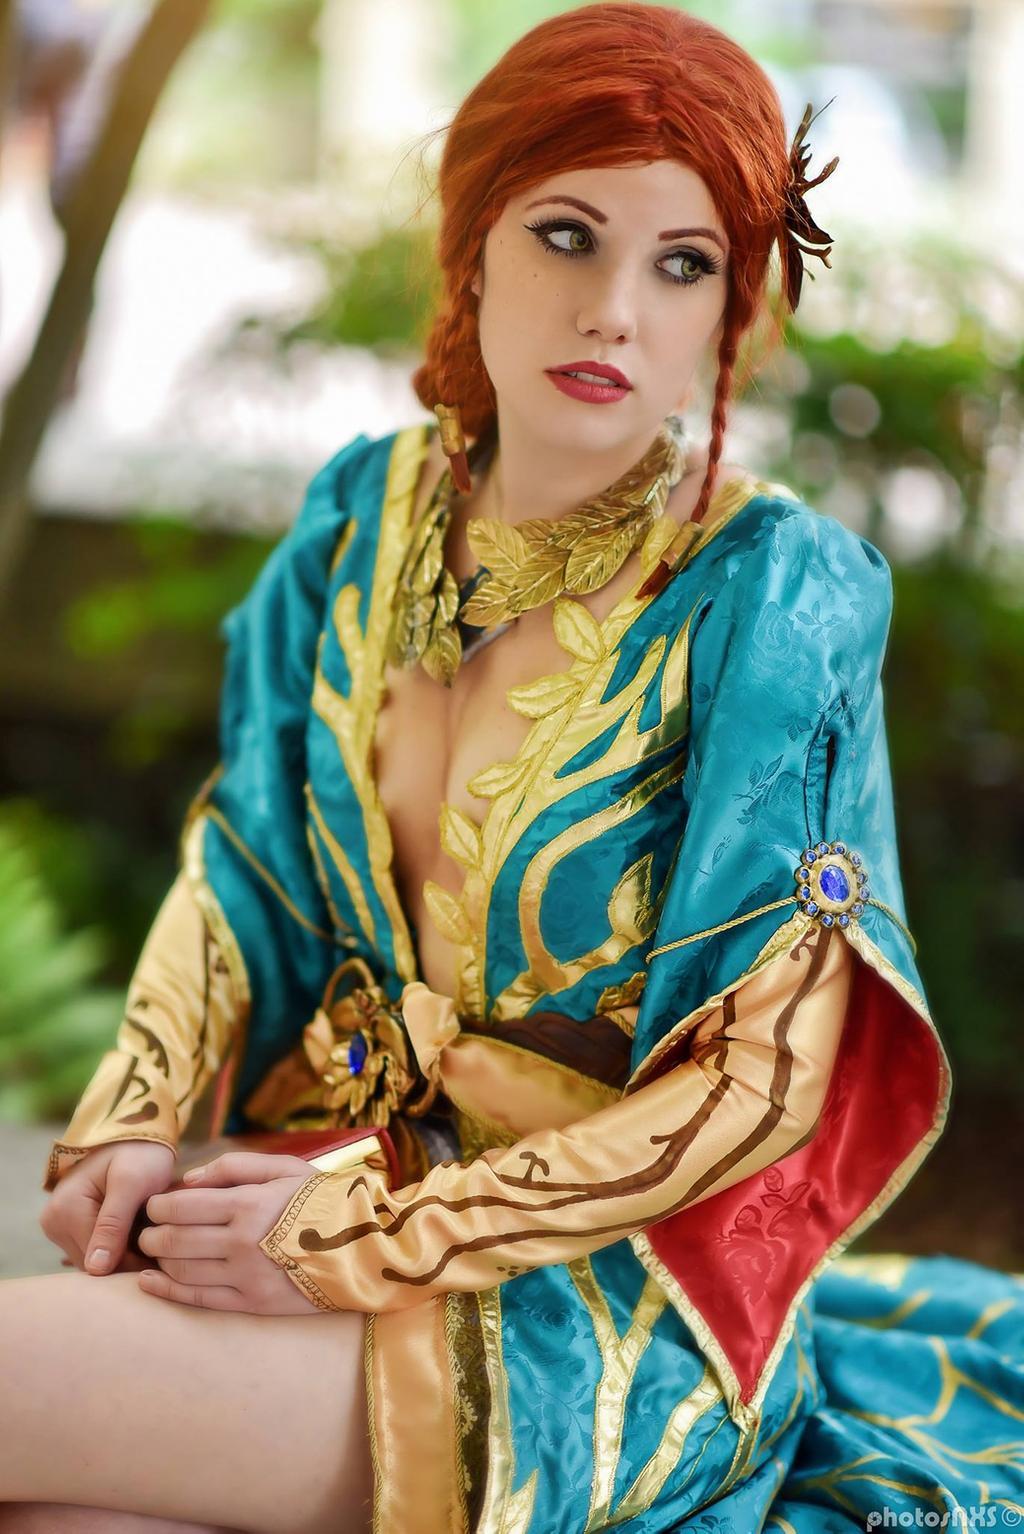 60+ Hot Pictures Of Triss Merigold From The Witcher Series Are Delight For Fans 9